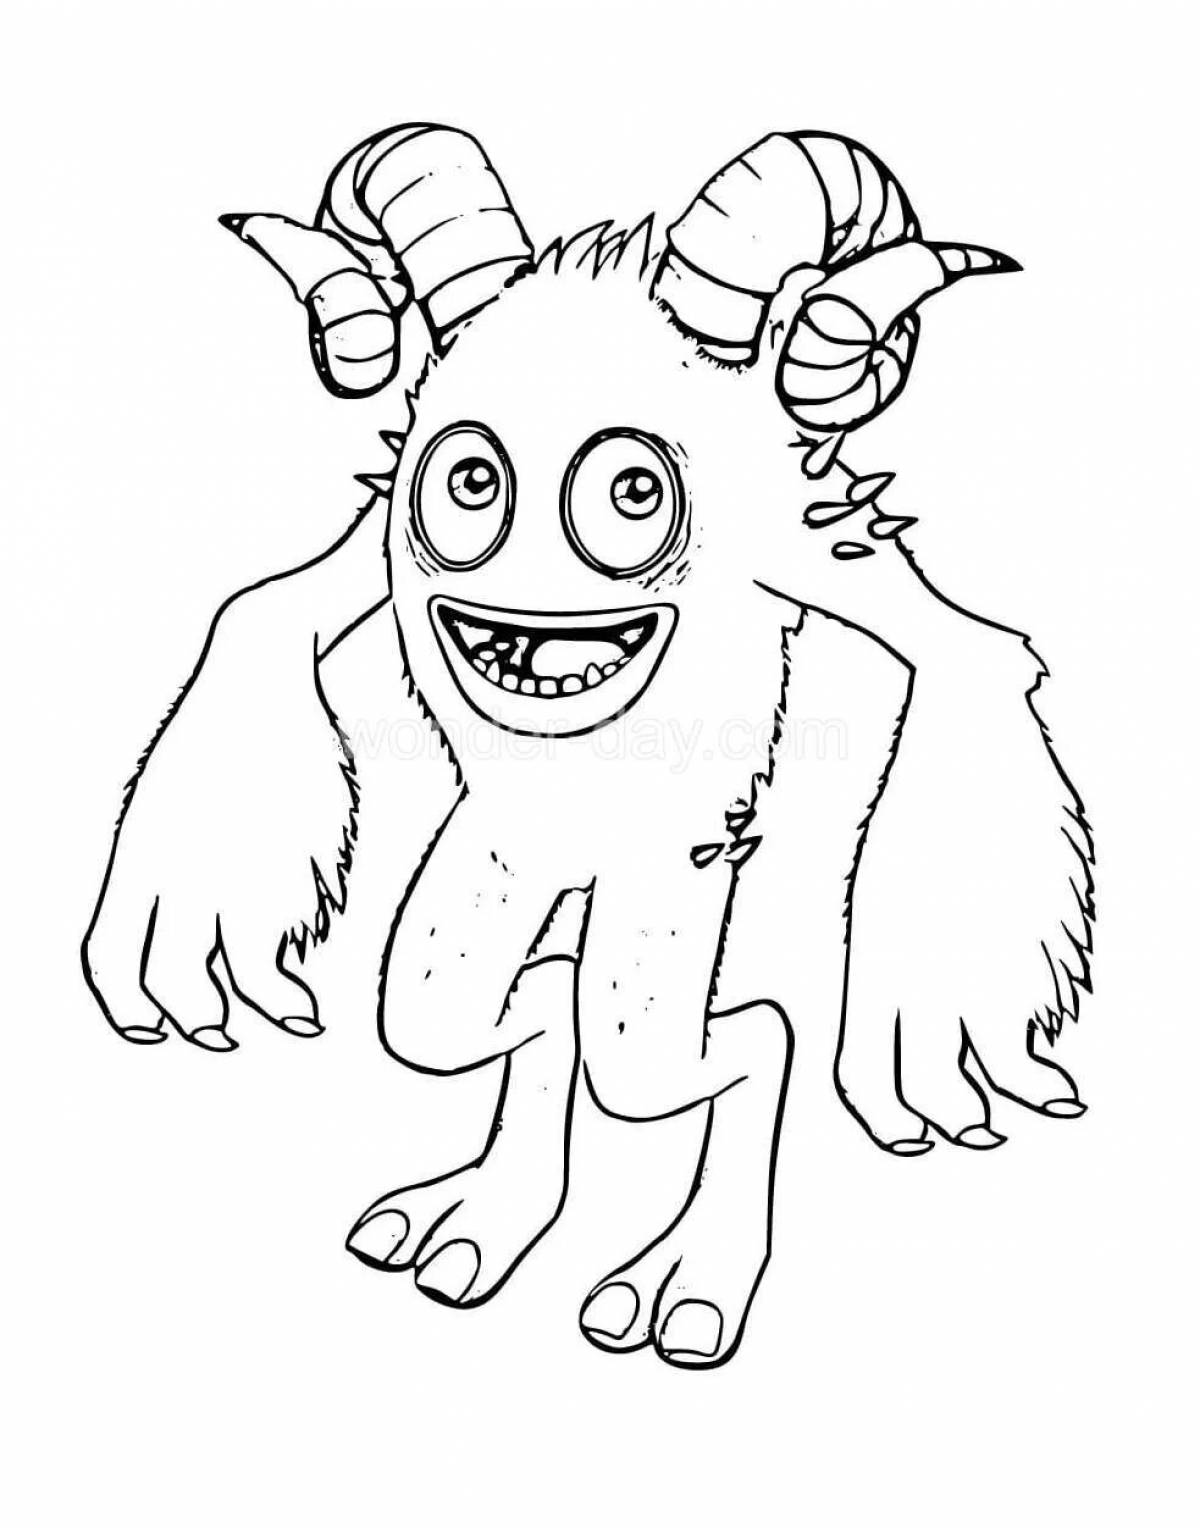 Outrageous musical monsters coloring page